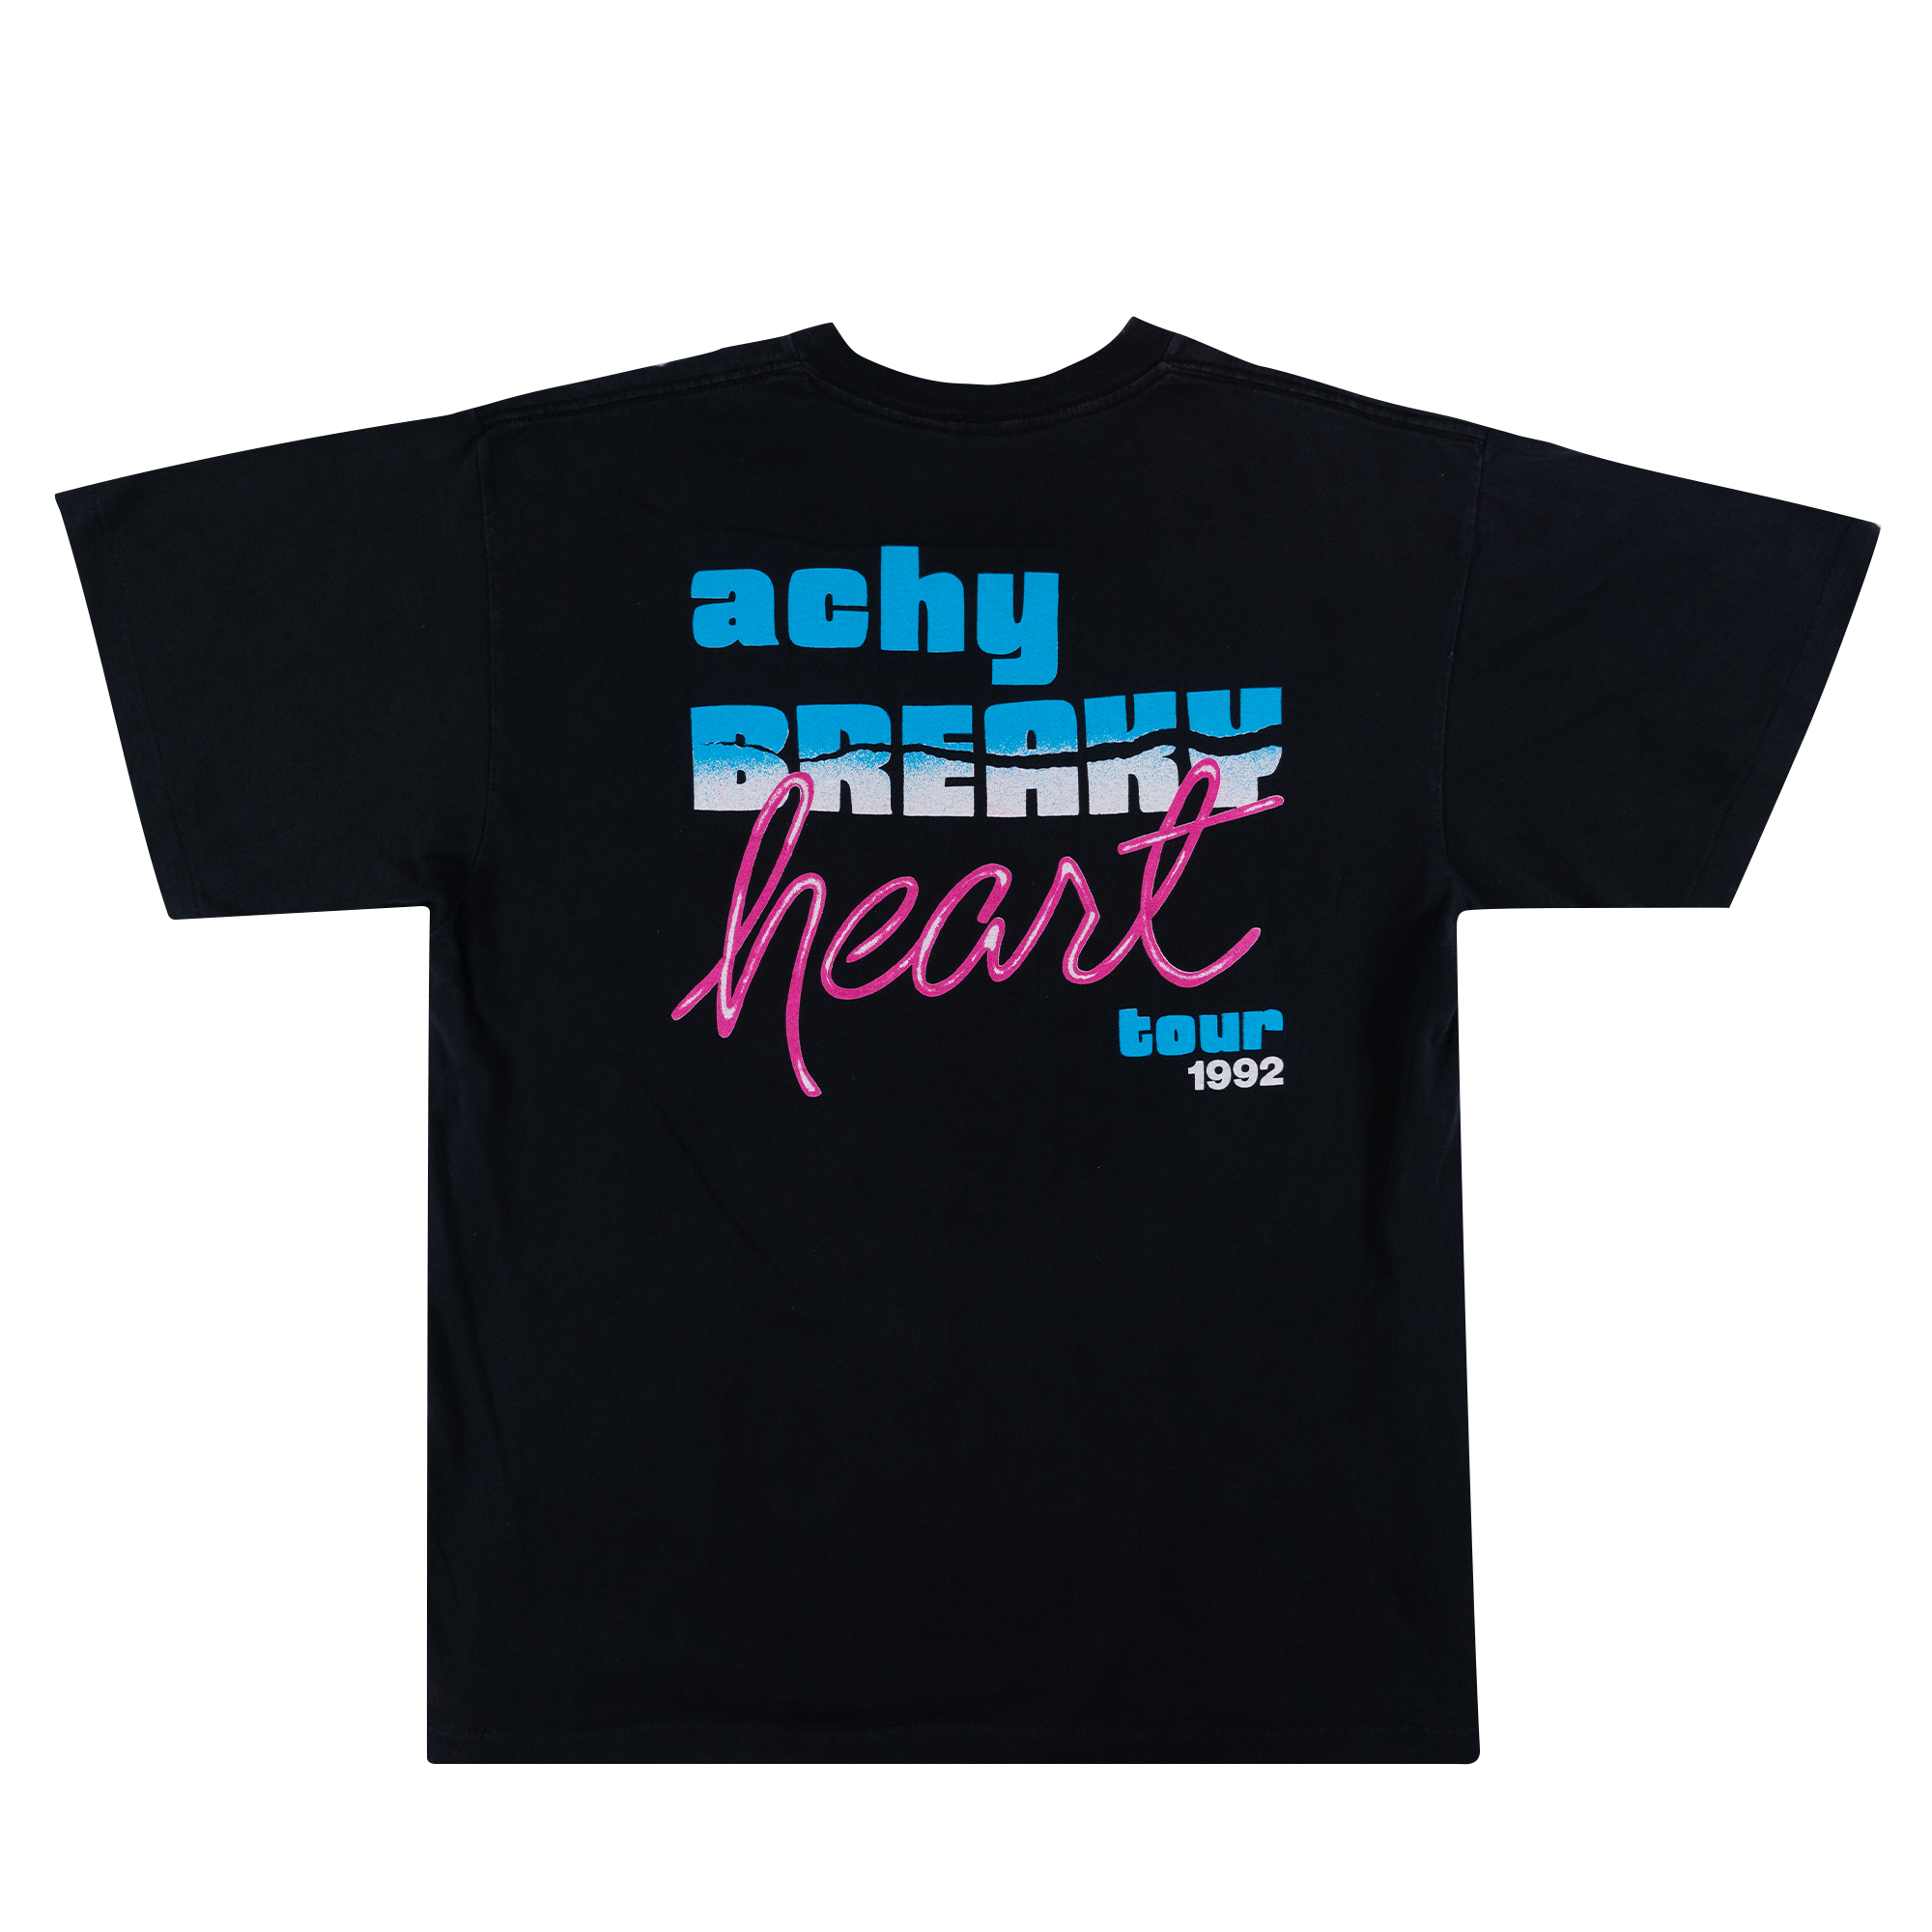 Billy Ray Cyrus Achy Breaky Heart Tour 1992 Tee Black-PLUS